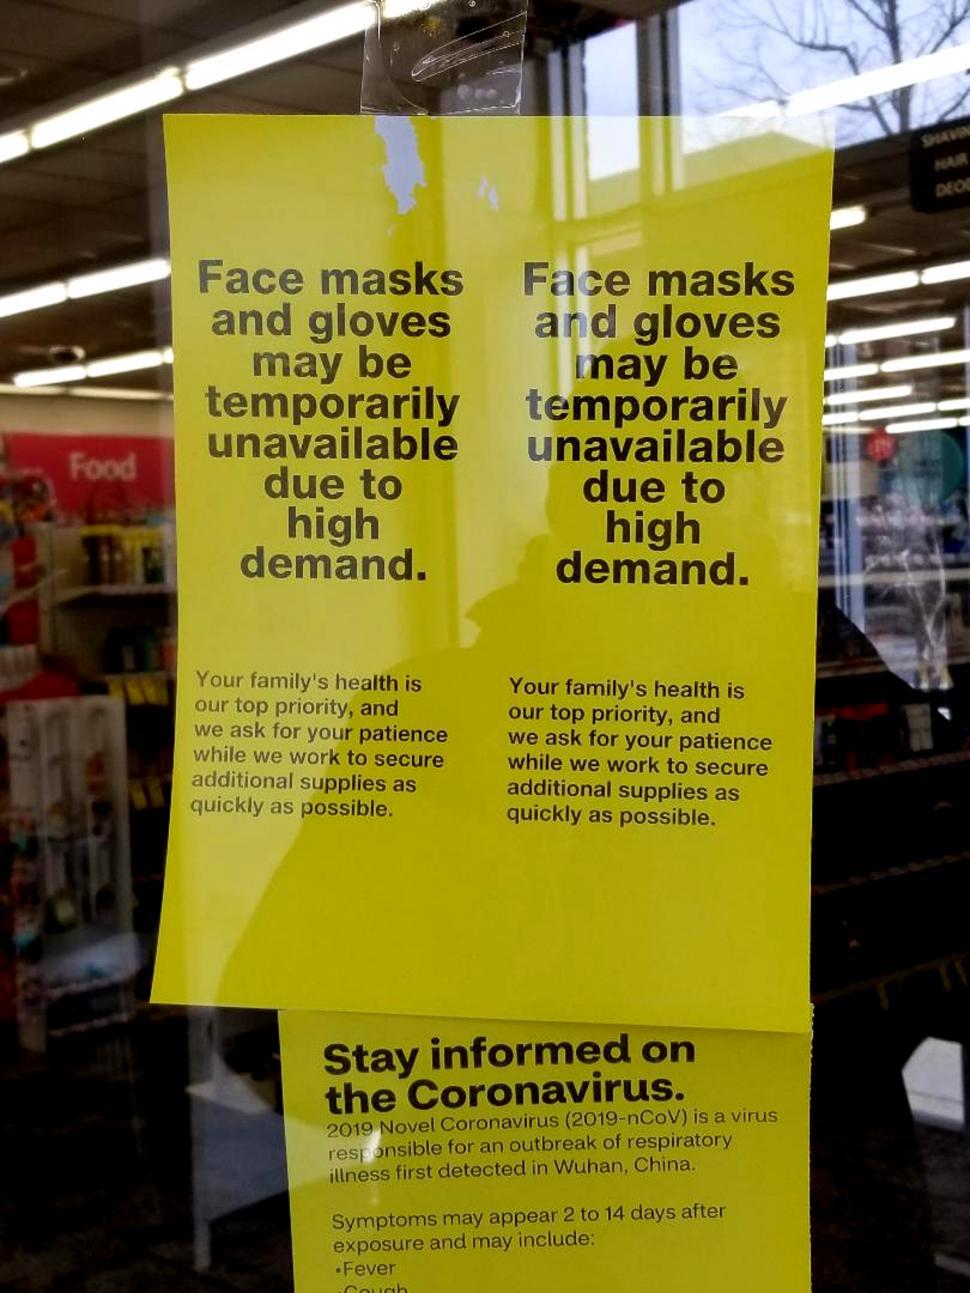 Free Image of Facemasks and gloves unavailable 